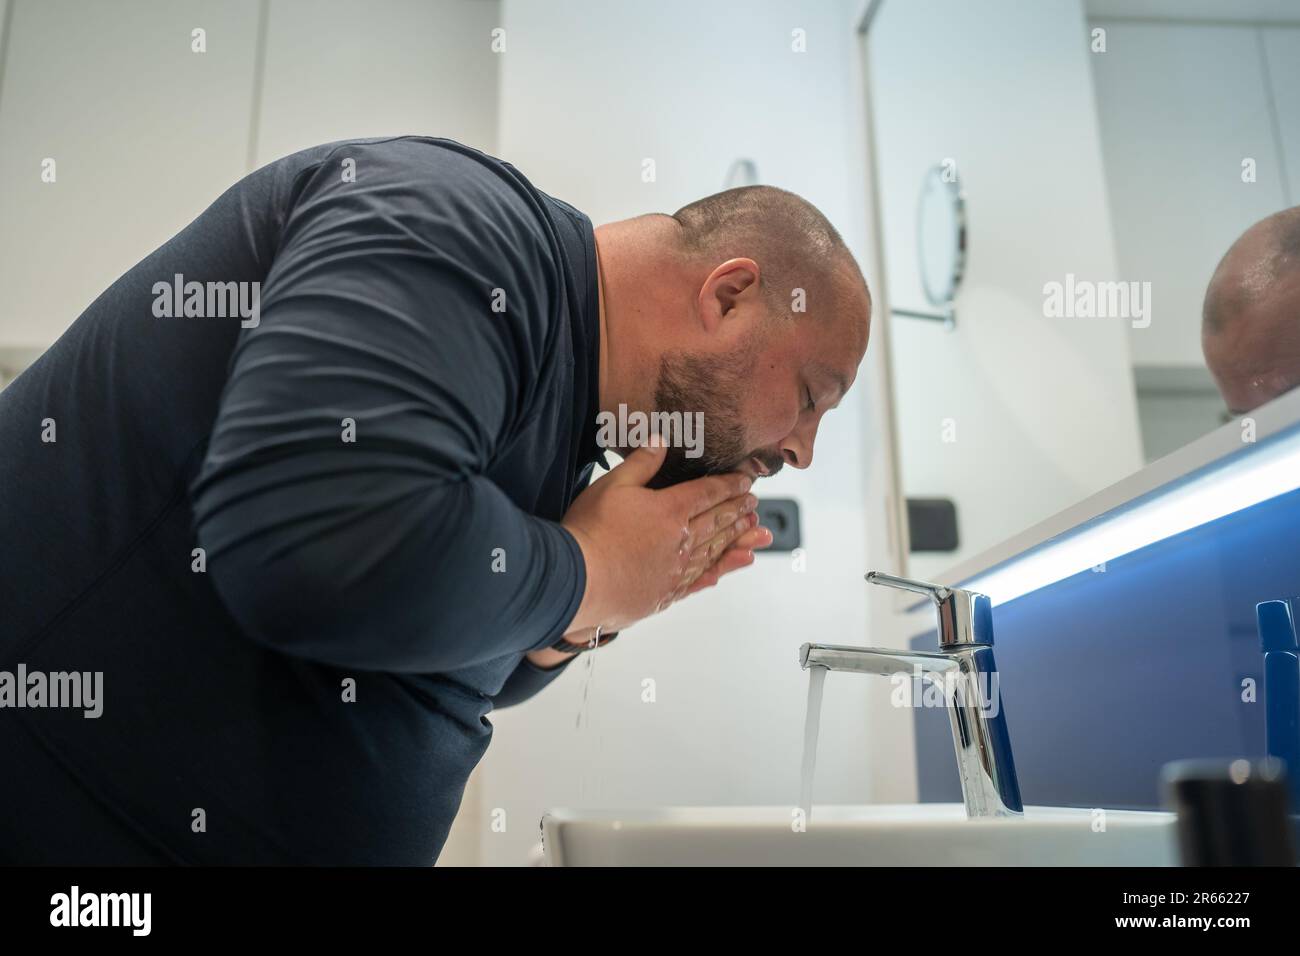 Fat, bald, bearded middle-aged man washes face in bathroom home int sink. Overweight and sweat Stock Photo